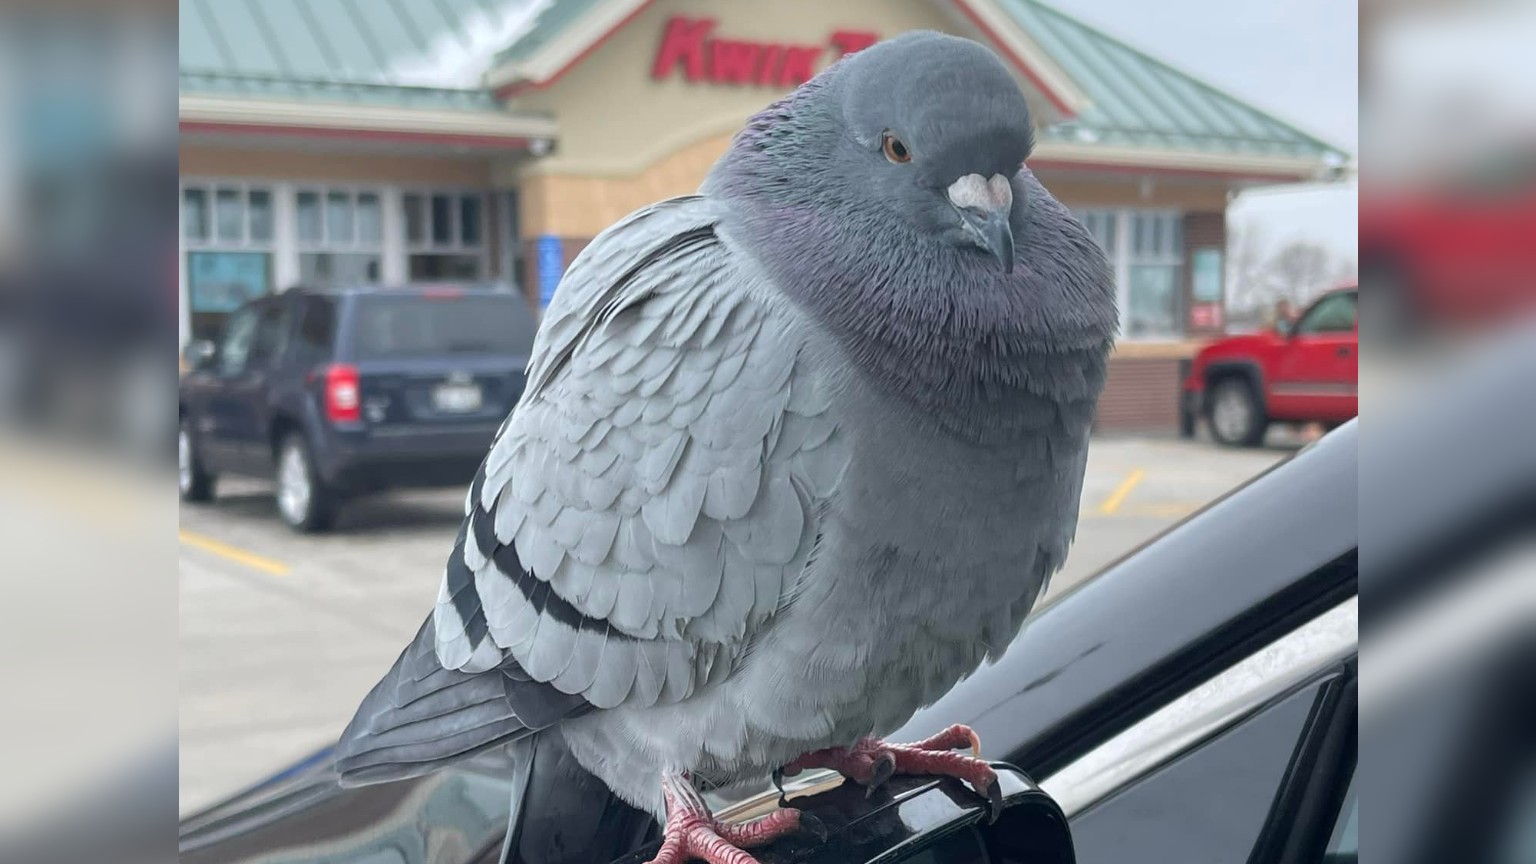 Tanya Pfeiffer posted this photo to social media of the Qwik Trip friendly pigeon perched on her car.